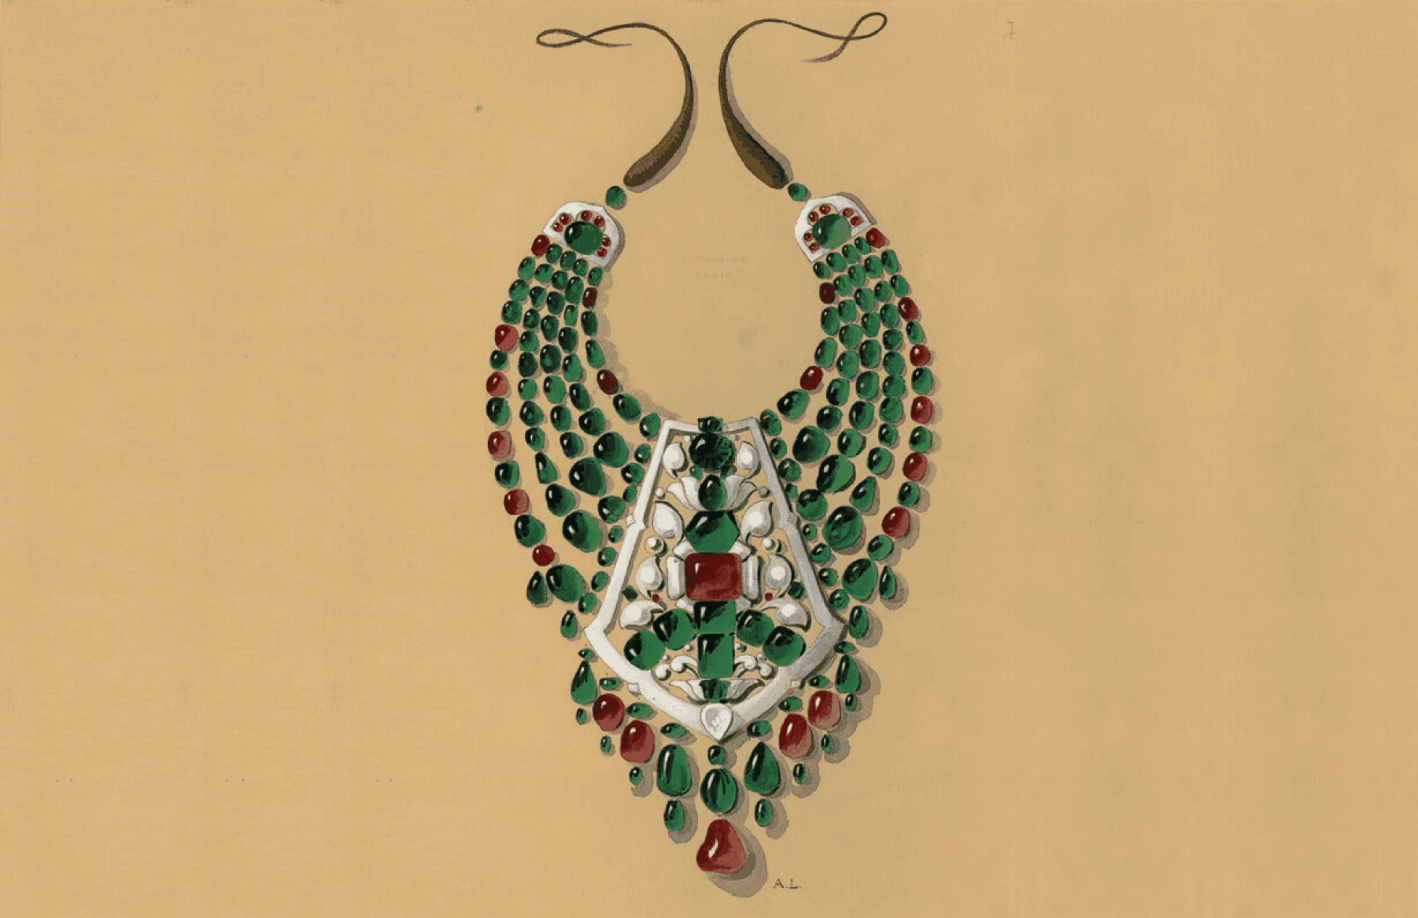 Drawing of a necklace from the order that Maharaja of Patiala placed